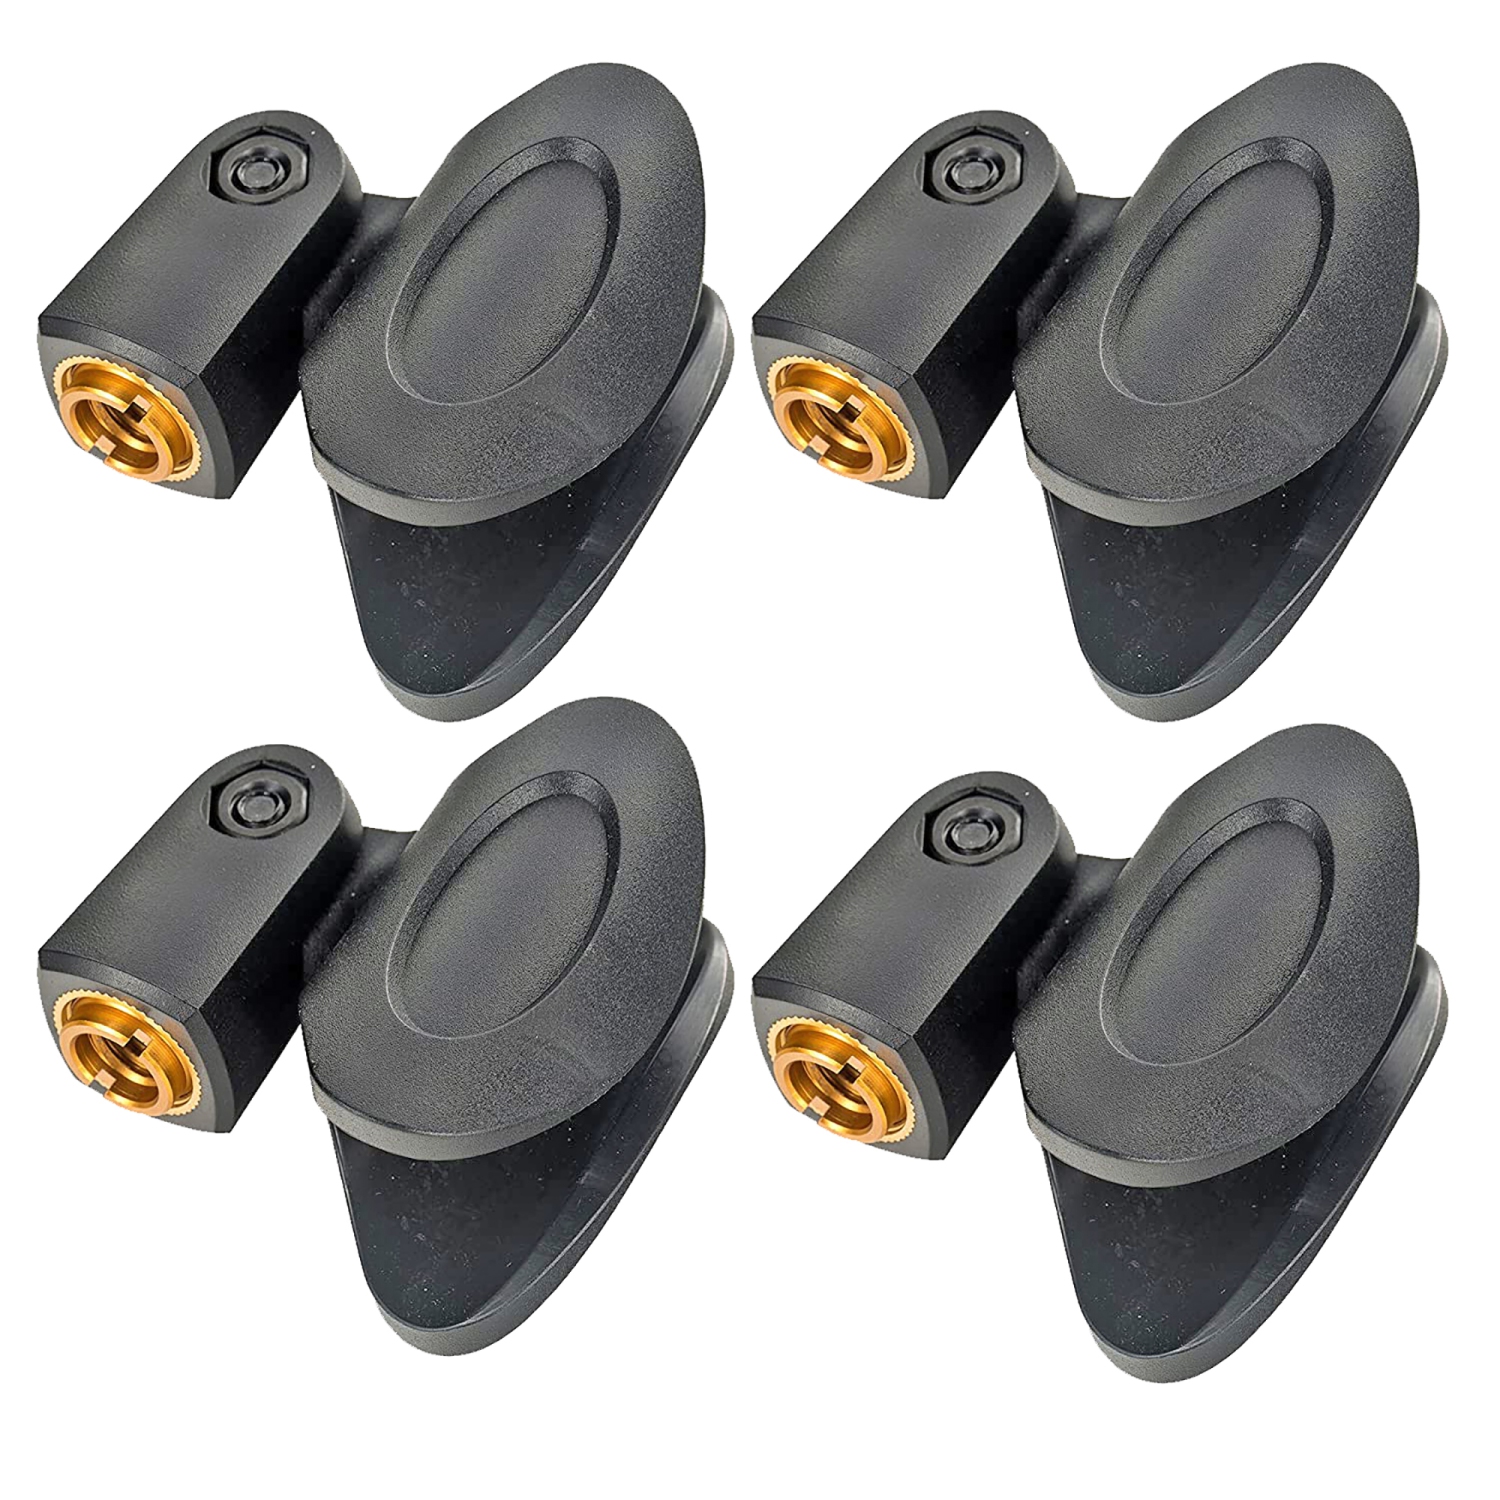 5 Core Universal Microphone Clip 2 Pieces Mic Holder with 5/8" Male to 3/8" Female Screw Adapter Soporte Para Microfono